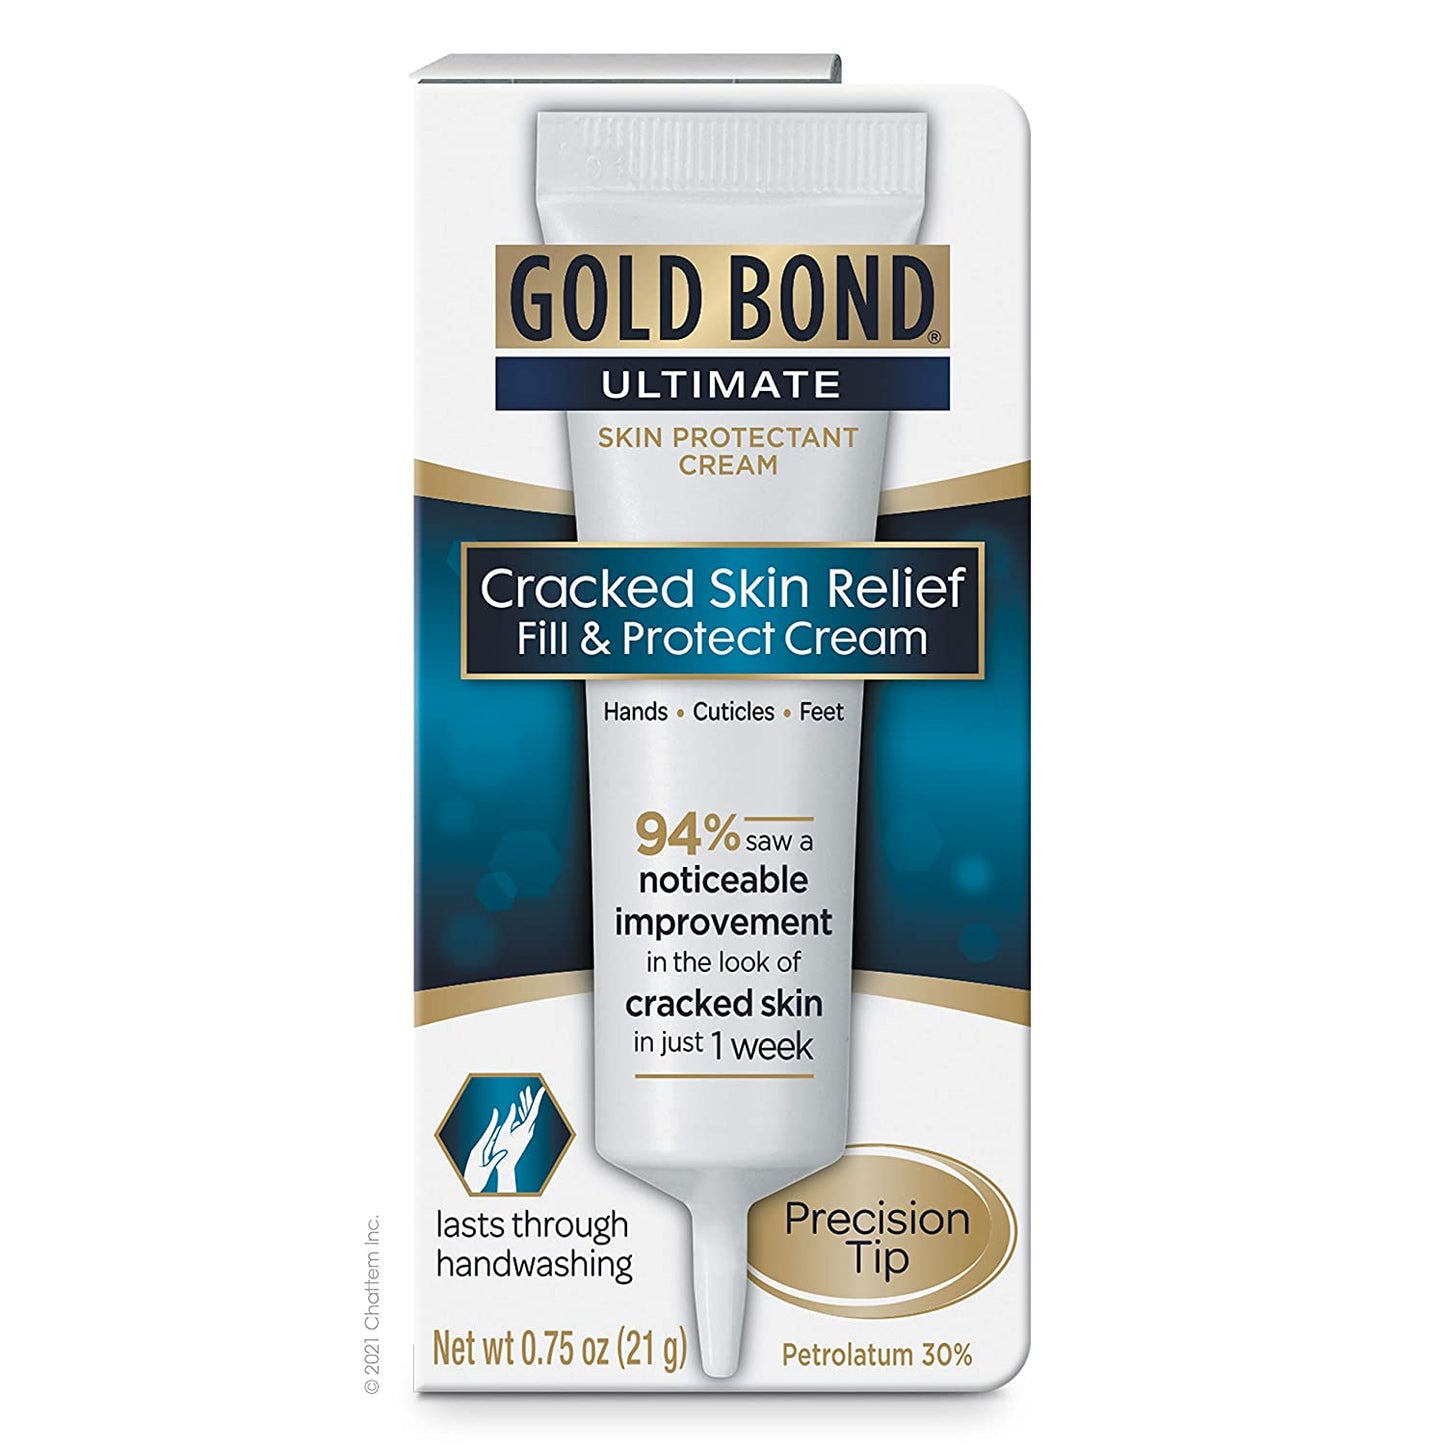 Gold Bond Ultimate Cracked Skin Relief Fill & Protect Cream, Precision Tip, 0.75 oz. / 21g